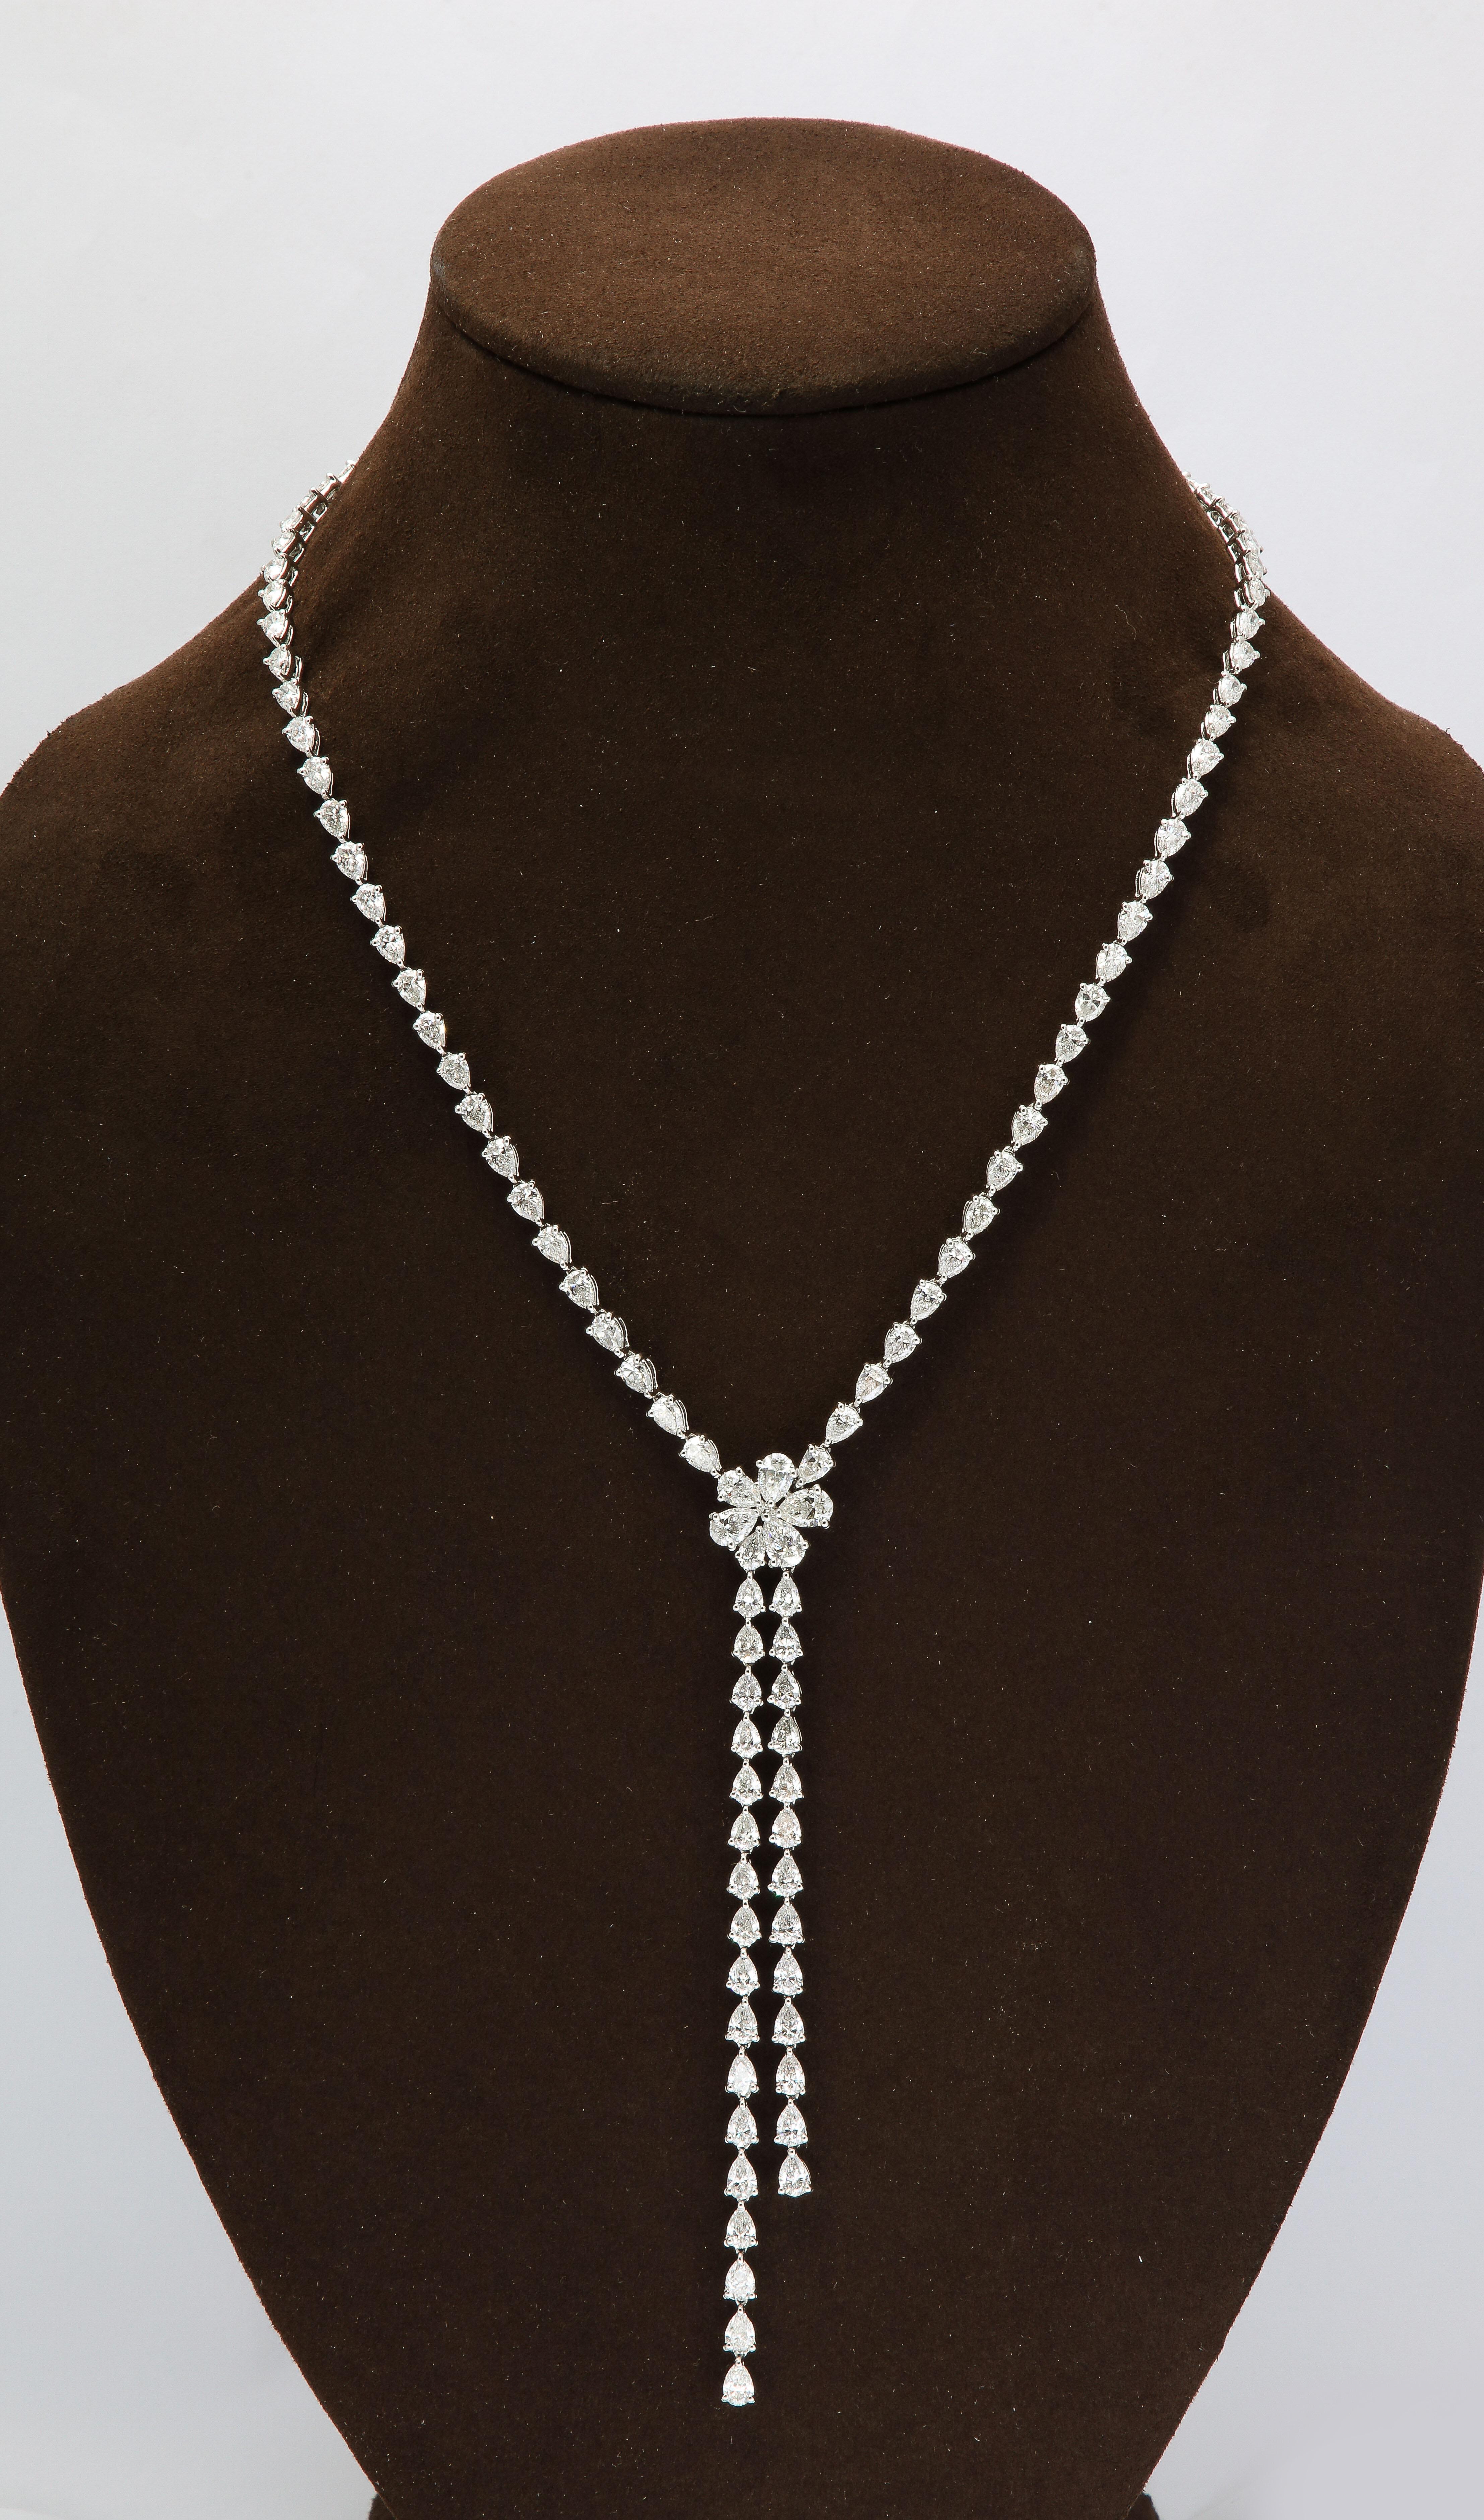 
A stunning, lariat style, drop necklace with a flower center. 

23.23 carats of white pear shape diamonds set in 18k white gold. 

17 inch length. 4 inch drop from center flower. 

Matching earrings are available in our 1stDibs store. 